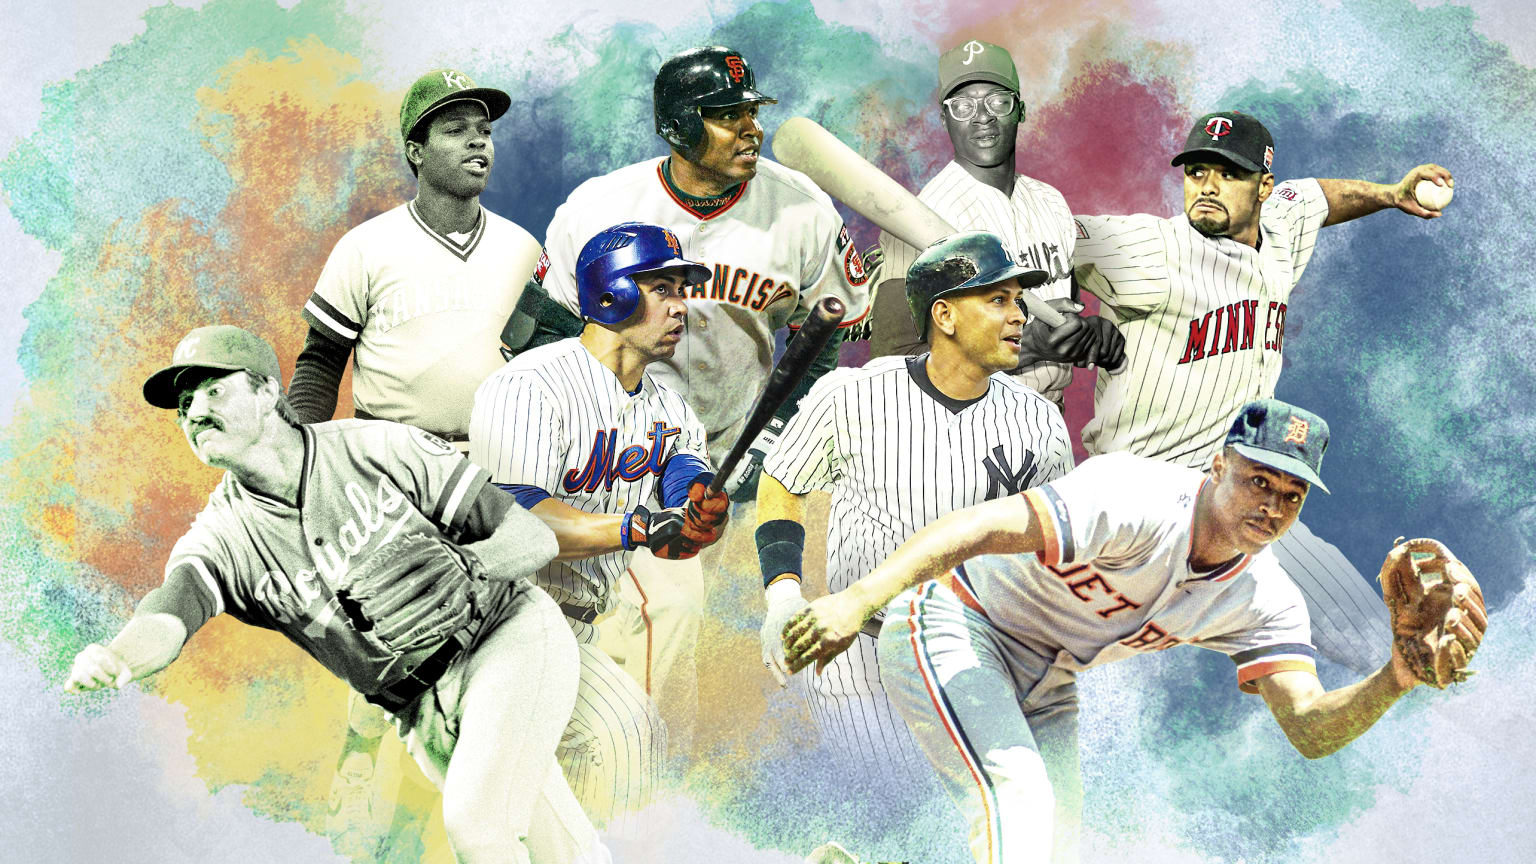 Eight players are pictured in a photo collage